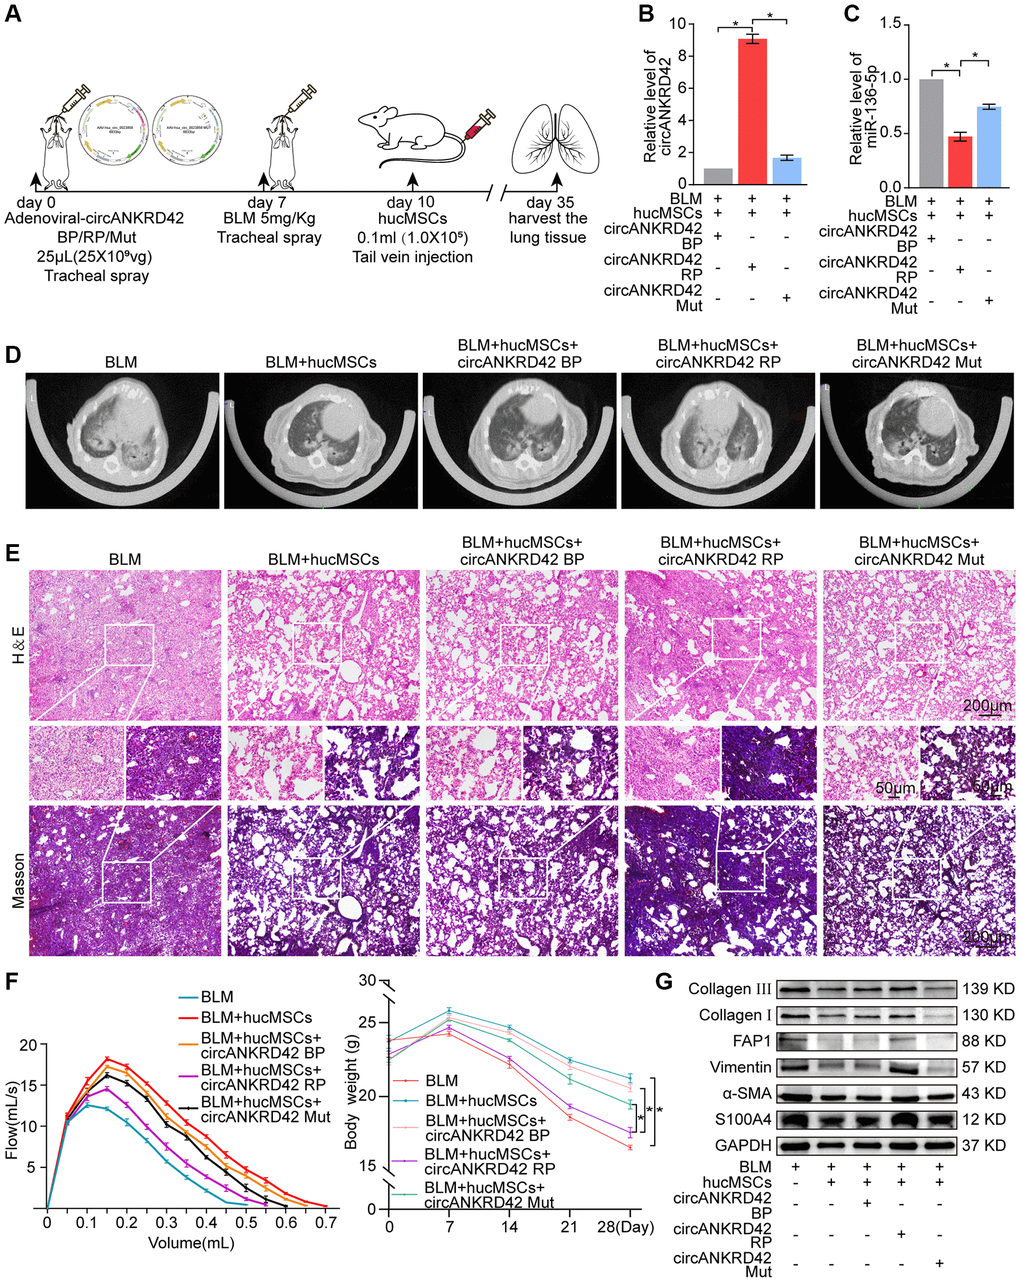 Rescue experiments proved that hucMSCs treatment alleviated pulmonary fibrosis by regulating the upstream circANKRD42-miR-136-5p of YAP1 in mice. (A) Schematic of the administration of overexpressed circANKRD42, circANKRD42 mutation, BLM, or hucMSCs into mice. (B) qRT-PCR revealed that circANKRD42 was substantially upregulated in overexpressed circANKRD42 group compared with other groups and reversed the inhibitory effect of hucMSCs treatment. The effect of circANKRD42 mutation was weaker than that of overexpressed circANKRD42. (C) circANKRD42 overexpression reversed the upward trend of miR-136-5p caused by hucMSCs treatment, and the effect of circANKRD42 mutation on miR-136-5p was weaker than that of overexpressed circANKRD42. (D) MicroCT imaging system for small animal showed that circANKRD42 overexpression reversed the therapeutic effect of hucMSCs and aggravated the degree of fibrosis. The effect of circANKRD42 mutation on fibrosis was weaker than that of overexpressed circANKRD42. (E) H&E and Masson staining exhibited that BLM caused excessive collagen deposition, bulk fibroblast paraplasm displacing alveolar space in lung tissues, and near disappearance of alveoli pulmonis. Fibrosis was improved in the BLM+hucMSCs group. Overexpressed circANKRD42 reversed the therapeutic effect of hucMSCs, but the effect of circANKRD42 mutation was weaker than that of overexpressed circANKRD42. (F) BLM deteriorated the lung function and body weight. Overexpressed circANKRD42 reversed the ameliorating effect of hucMSCs on the lung function and body weight. The effect of circANKRD42 mutation on the lung function and body weight was weaker than that of overexpressed circANKRD42. (G) Western blot identified that BLM promoted the expression levels of fibrotic and differentiation proteins. Overexpressed circANKRD42 reversed the effect of hucMSCs on these proteins. The effect of circANKRD42 mutation was weaker than that of overexpressed circANKRD42. Each bar represents the mean ± SD; n = 6; *p 